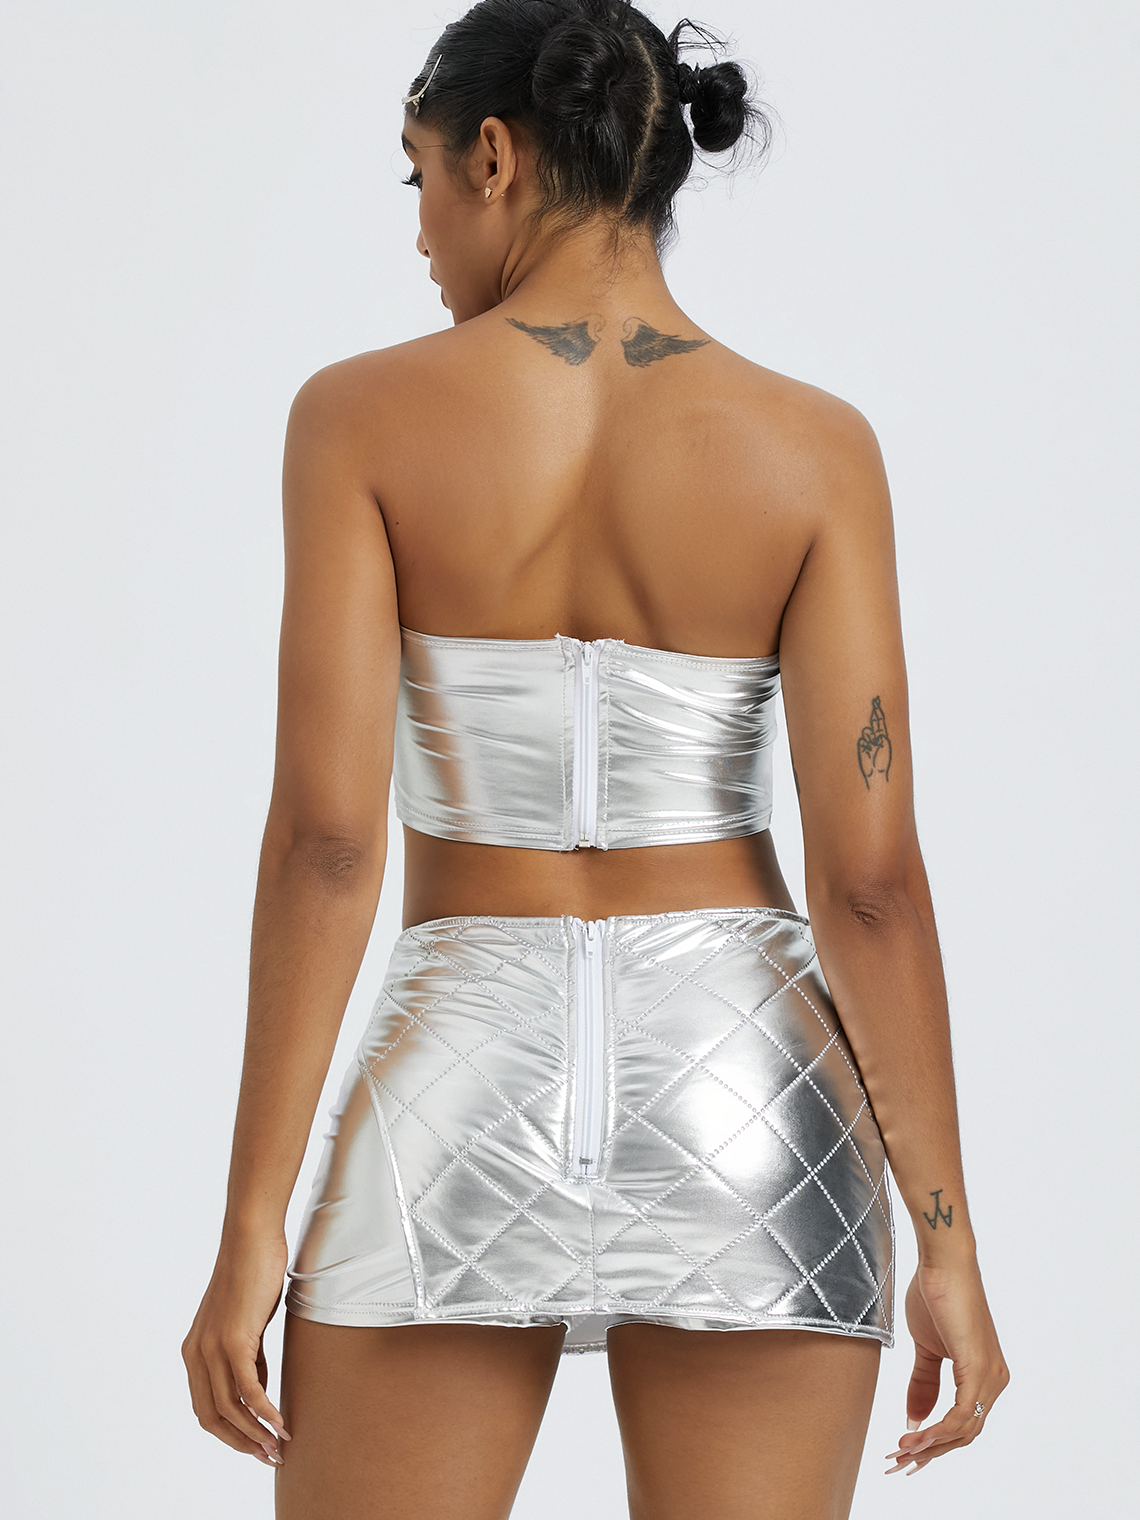 【Final Sale】Metallic Sliver Padded Top With Skirt Two-Piece Set